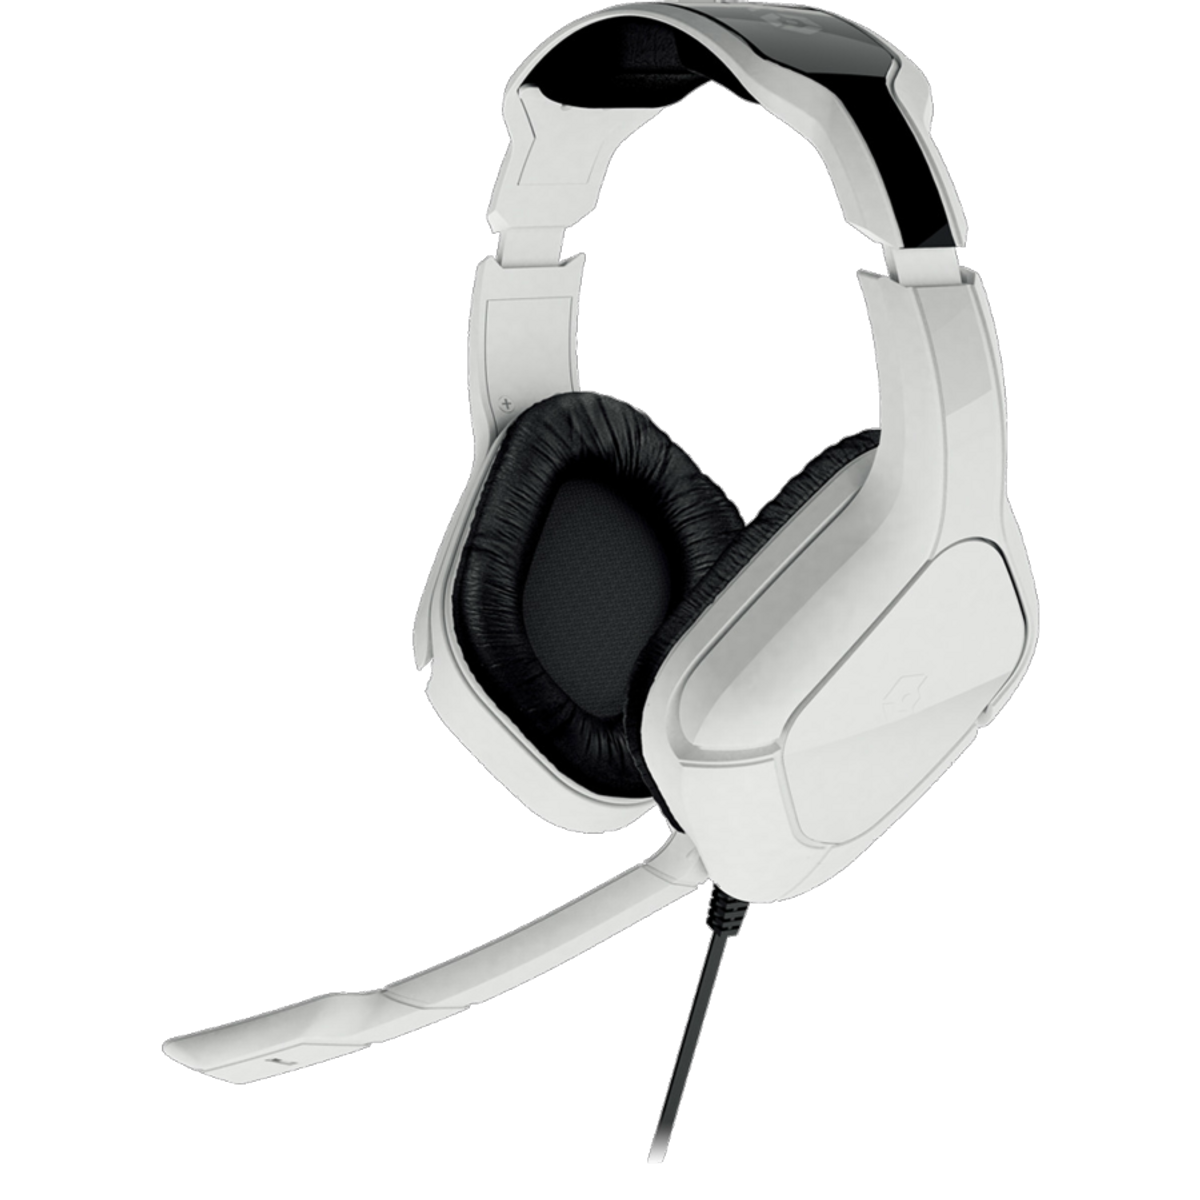 SUBSONIC SX6 Weiß WIRED, STORM Gaming Headset Over-ear